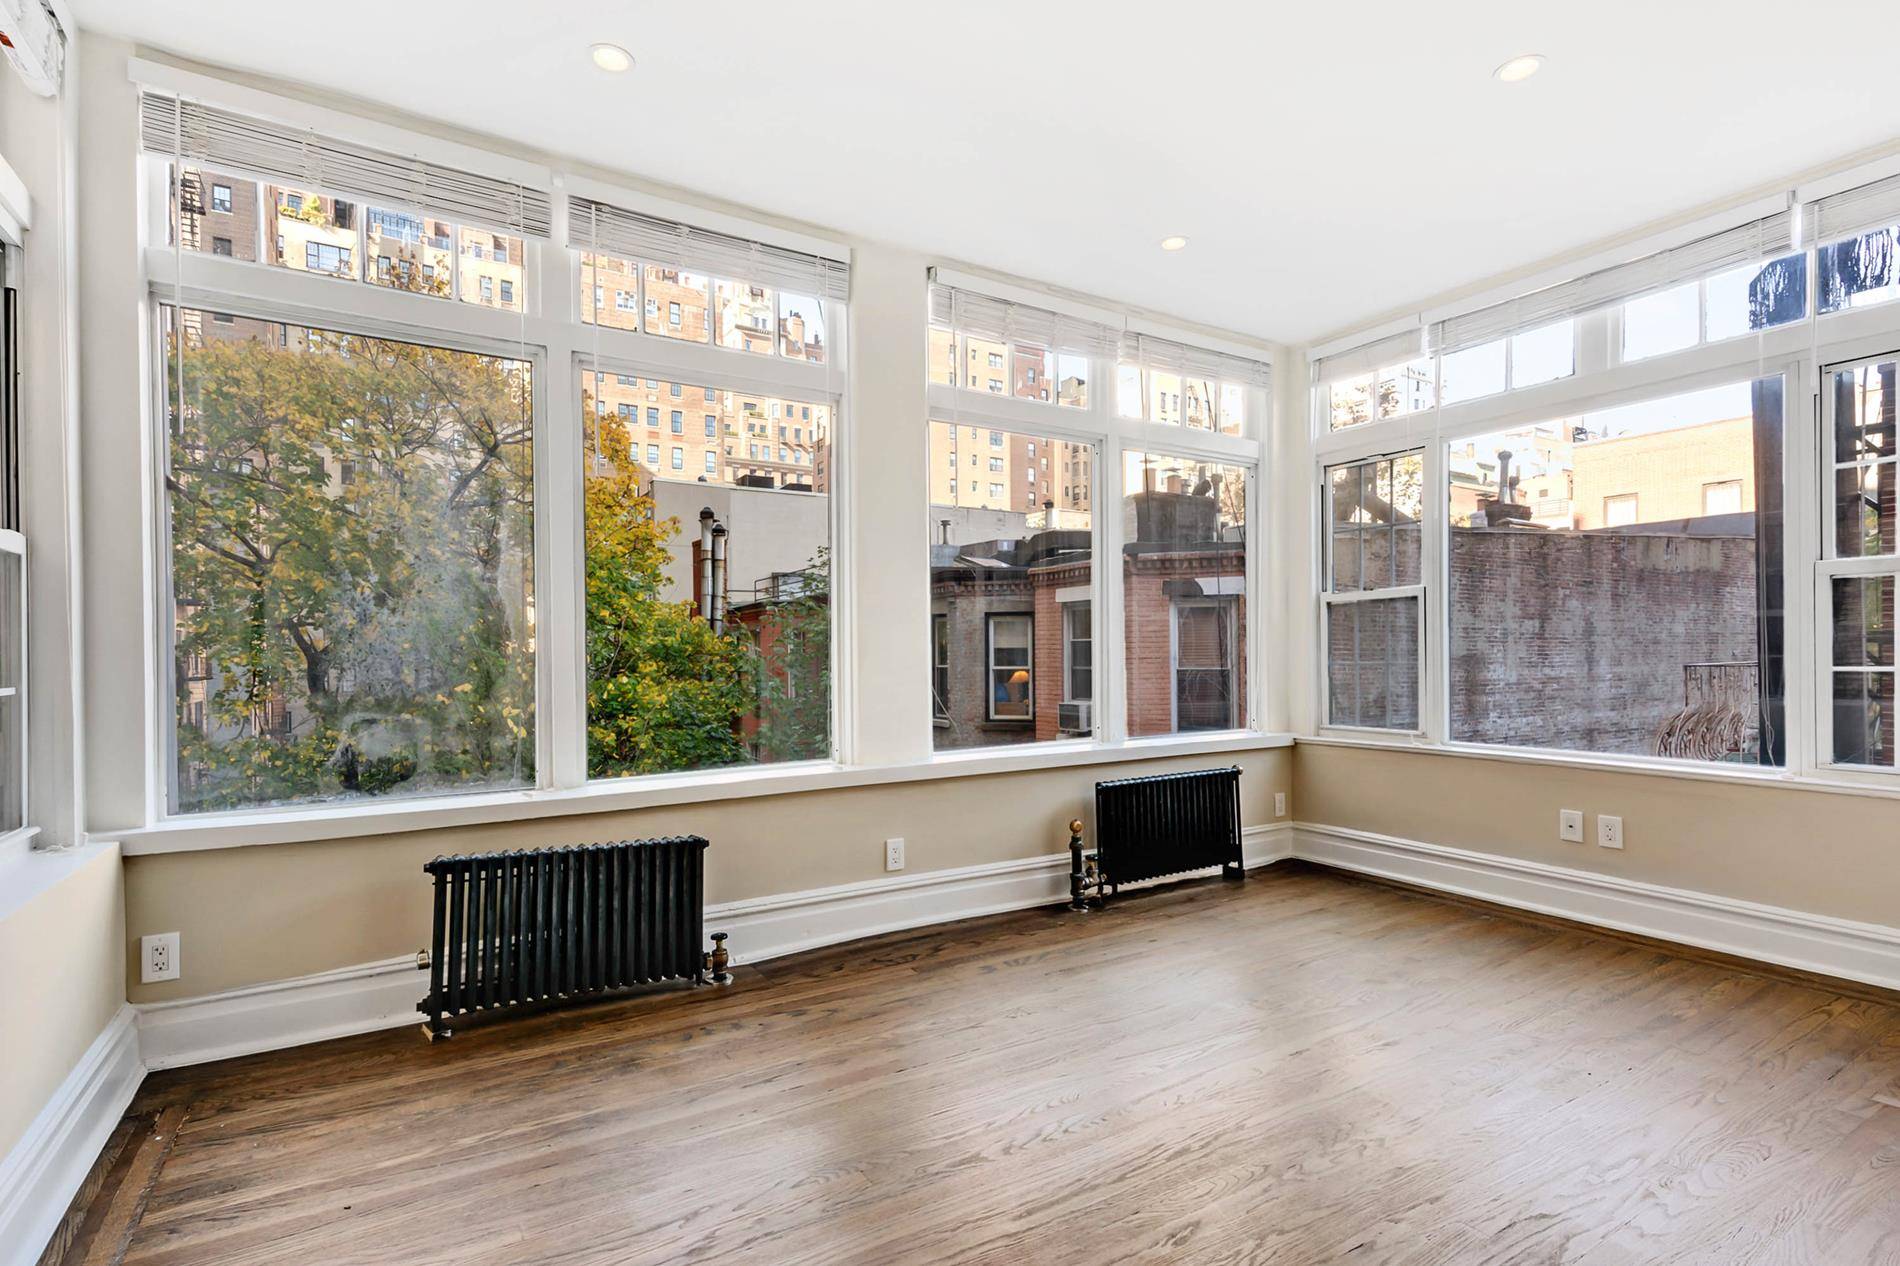 INTRODUCING 1012 LEXINGTON AVENUESTUNNING HOME W CONDO QUALITY FINISHESABOUT APT Western Exposure w Sky amp ; Neighborhood Views, Sun Drenched Bedroom, Exposed Brick, Recessed Lighting Throughout, Baseboard Moldings, Gorgeous Wood ...